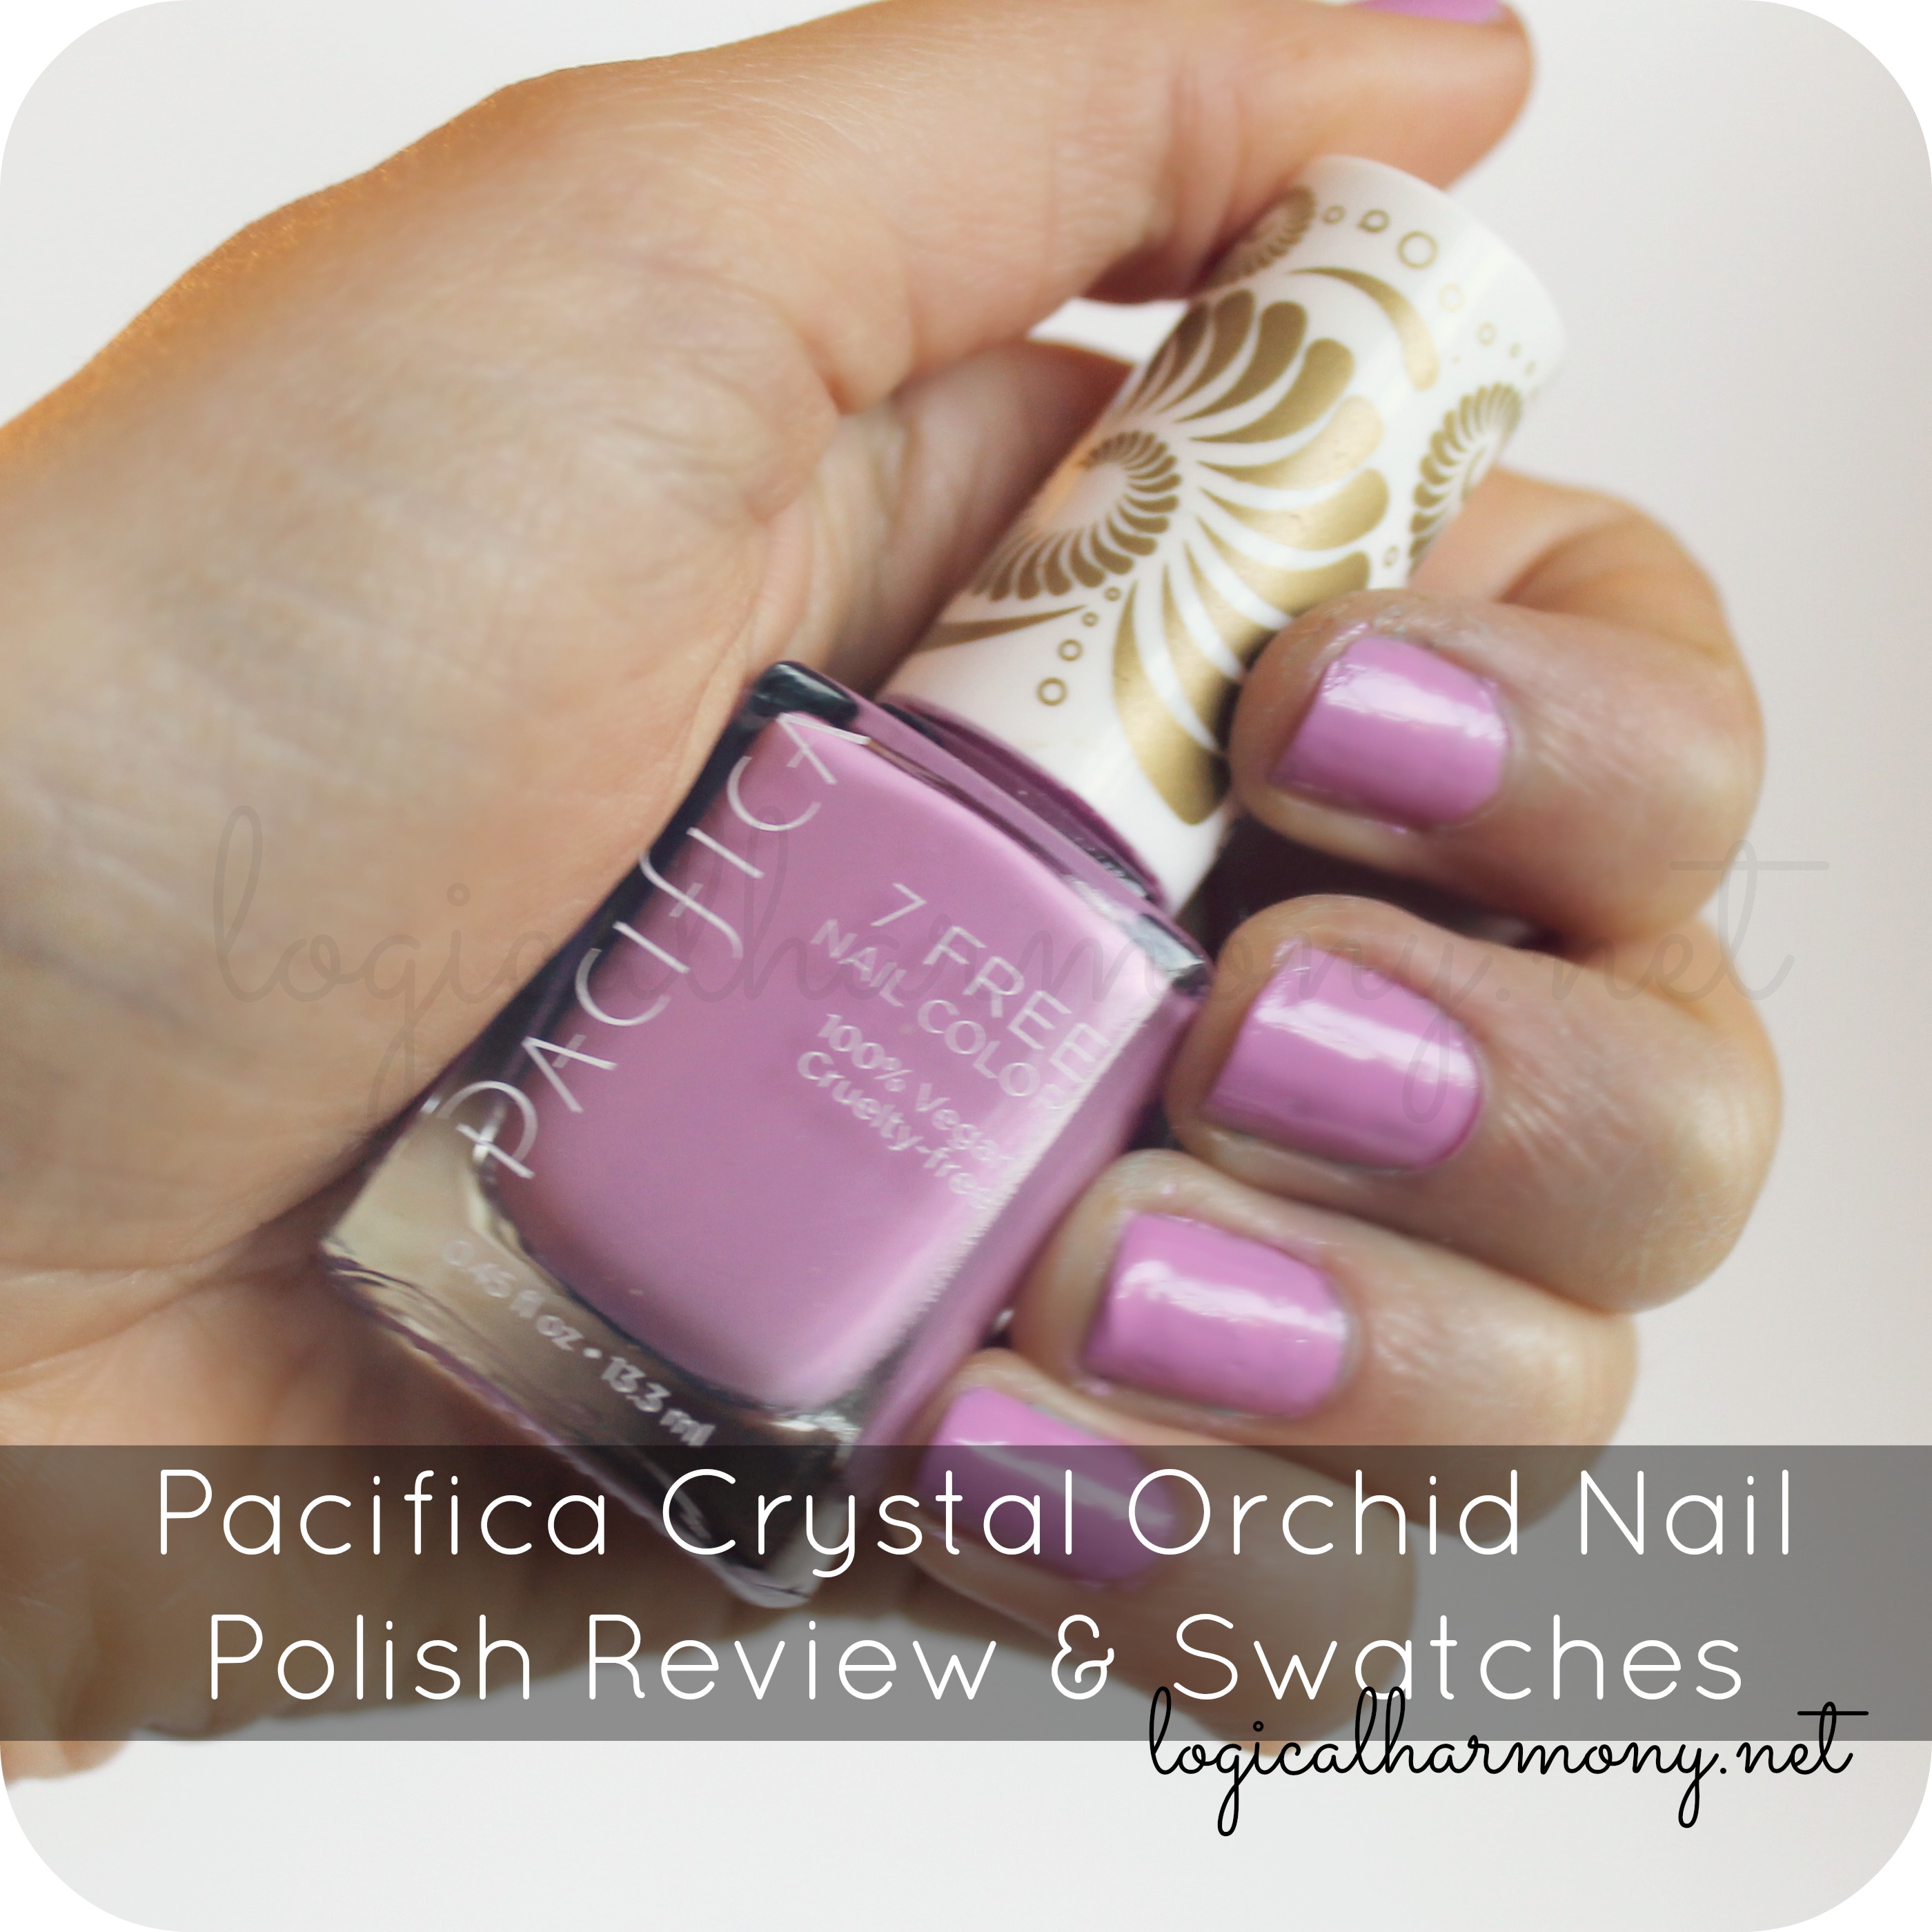 Pacifica Crystal Orchid Nail Polish Review & Swatches